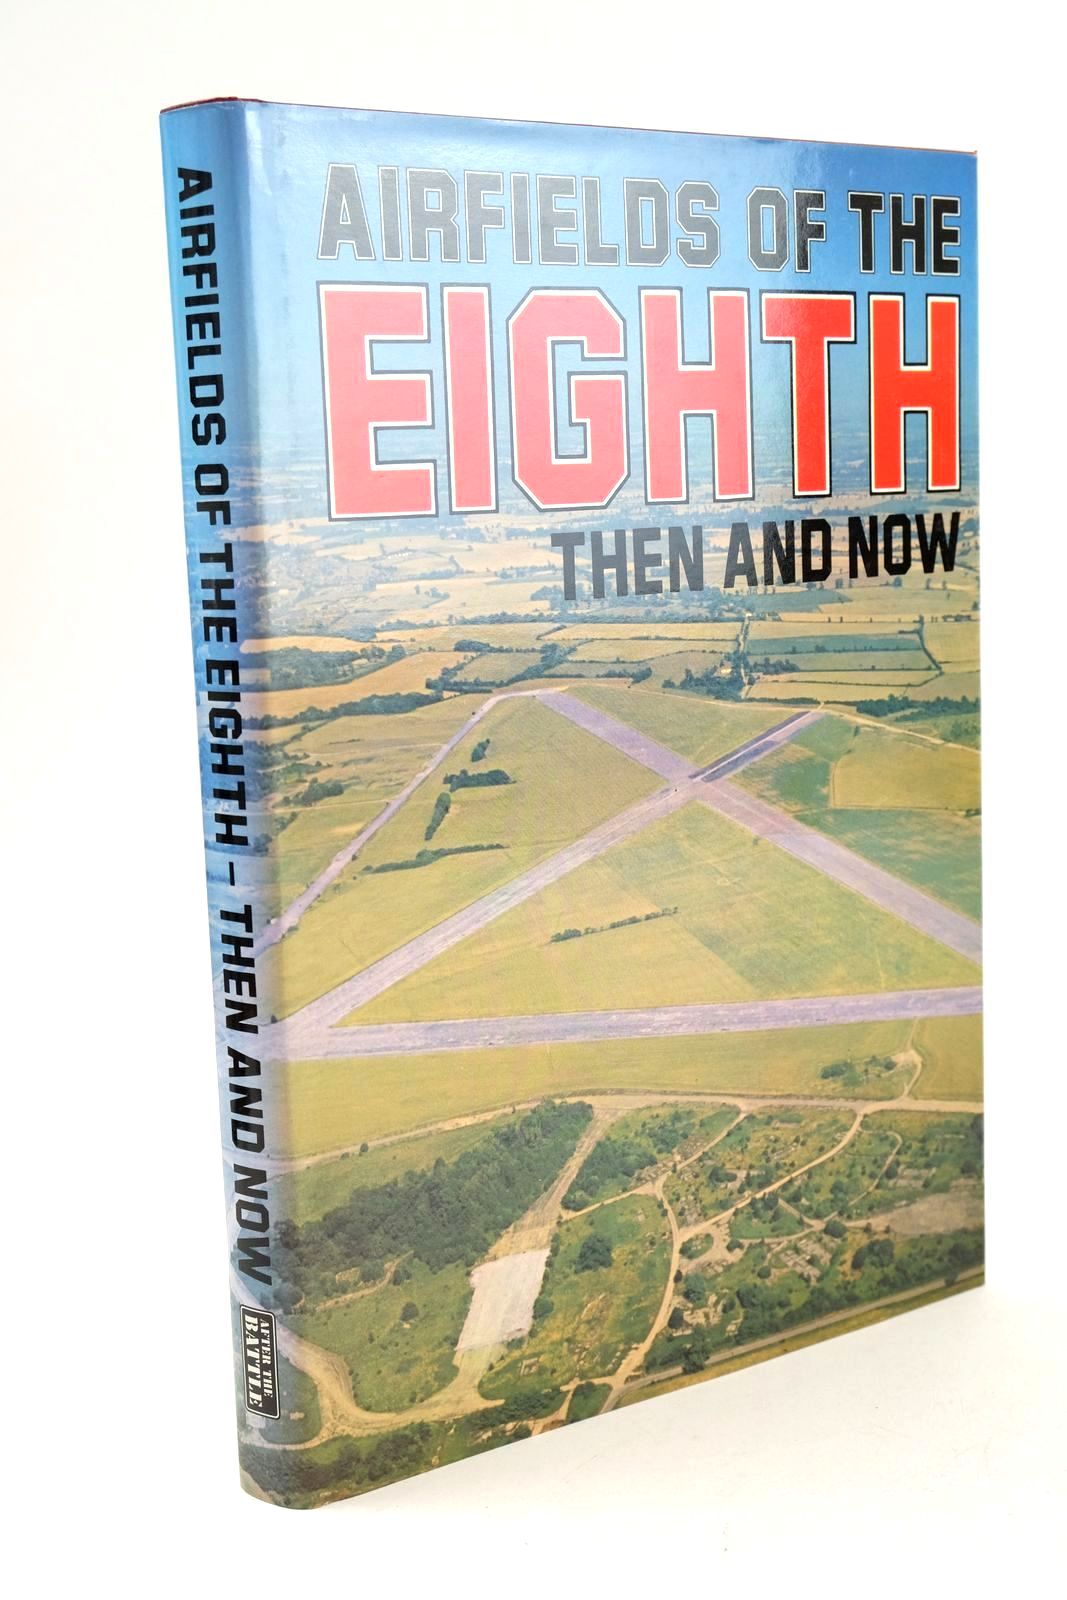 Photo of AIRFIELDS OF THE EIGHTH THEN AND NOW written by Freeman, Roger A. published by Battle of Britain Prints International Ltd. (STOCK CODE: 1325141)  for sale by Stella & Rose's Books